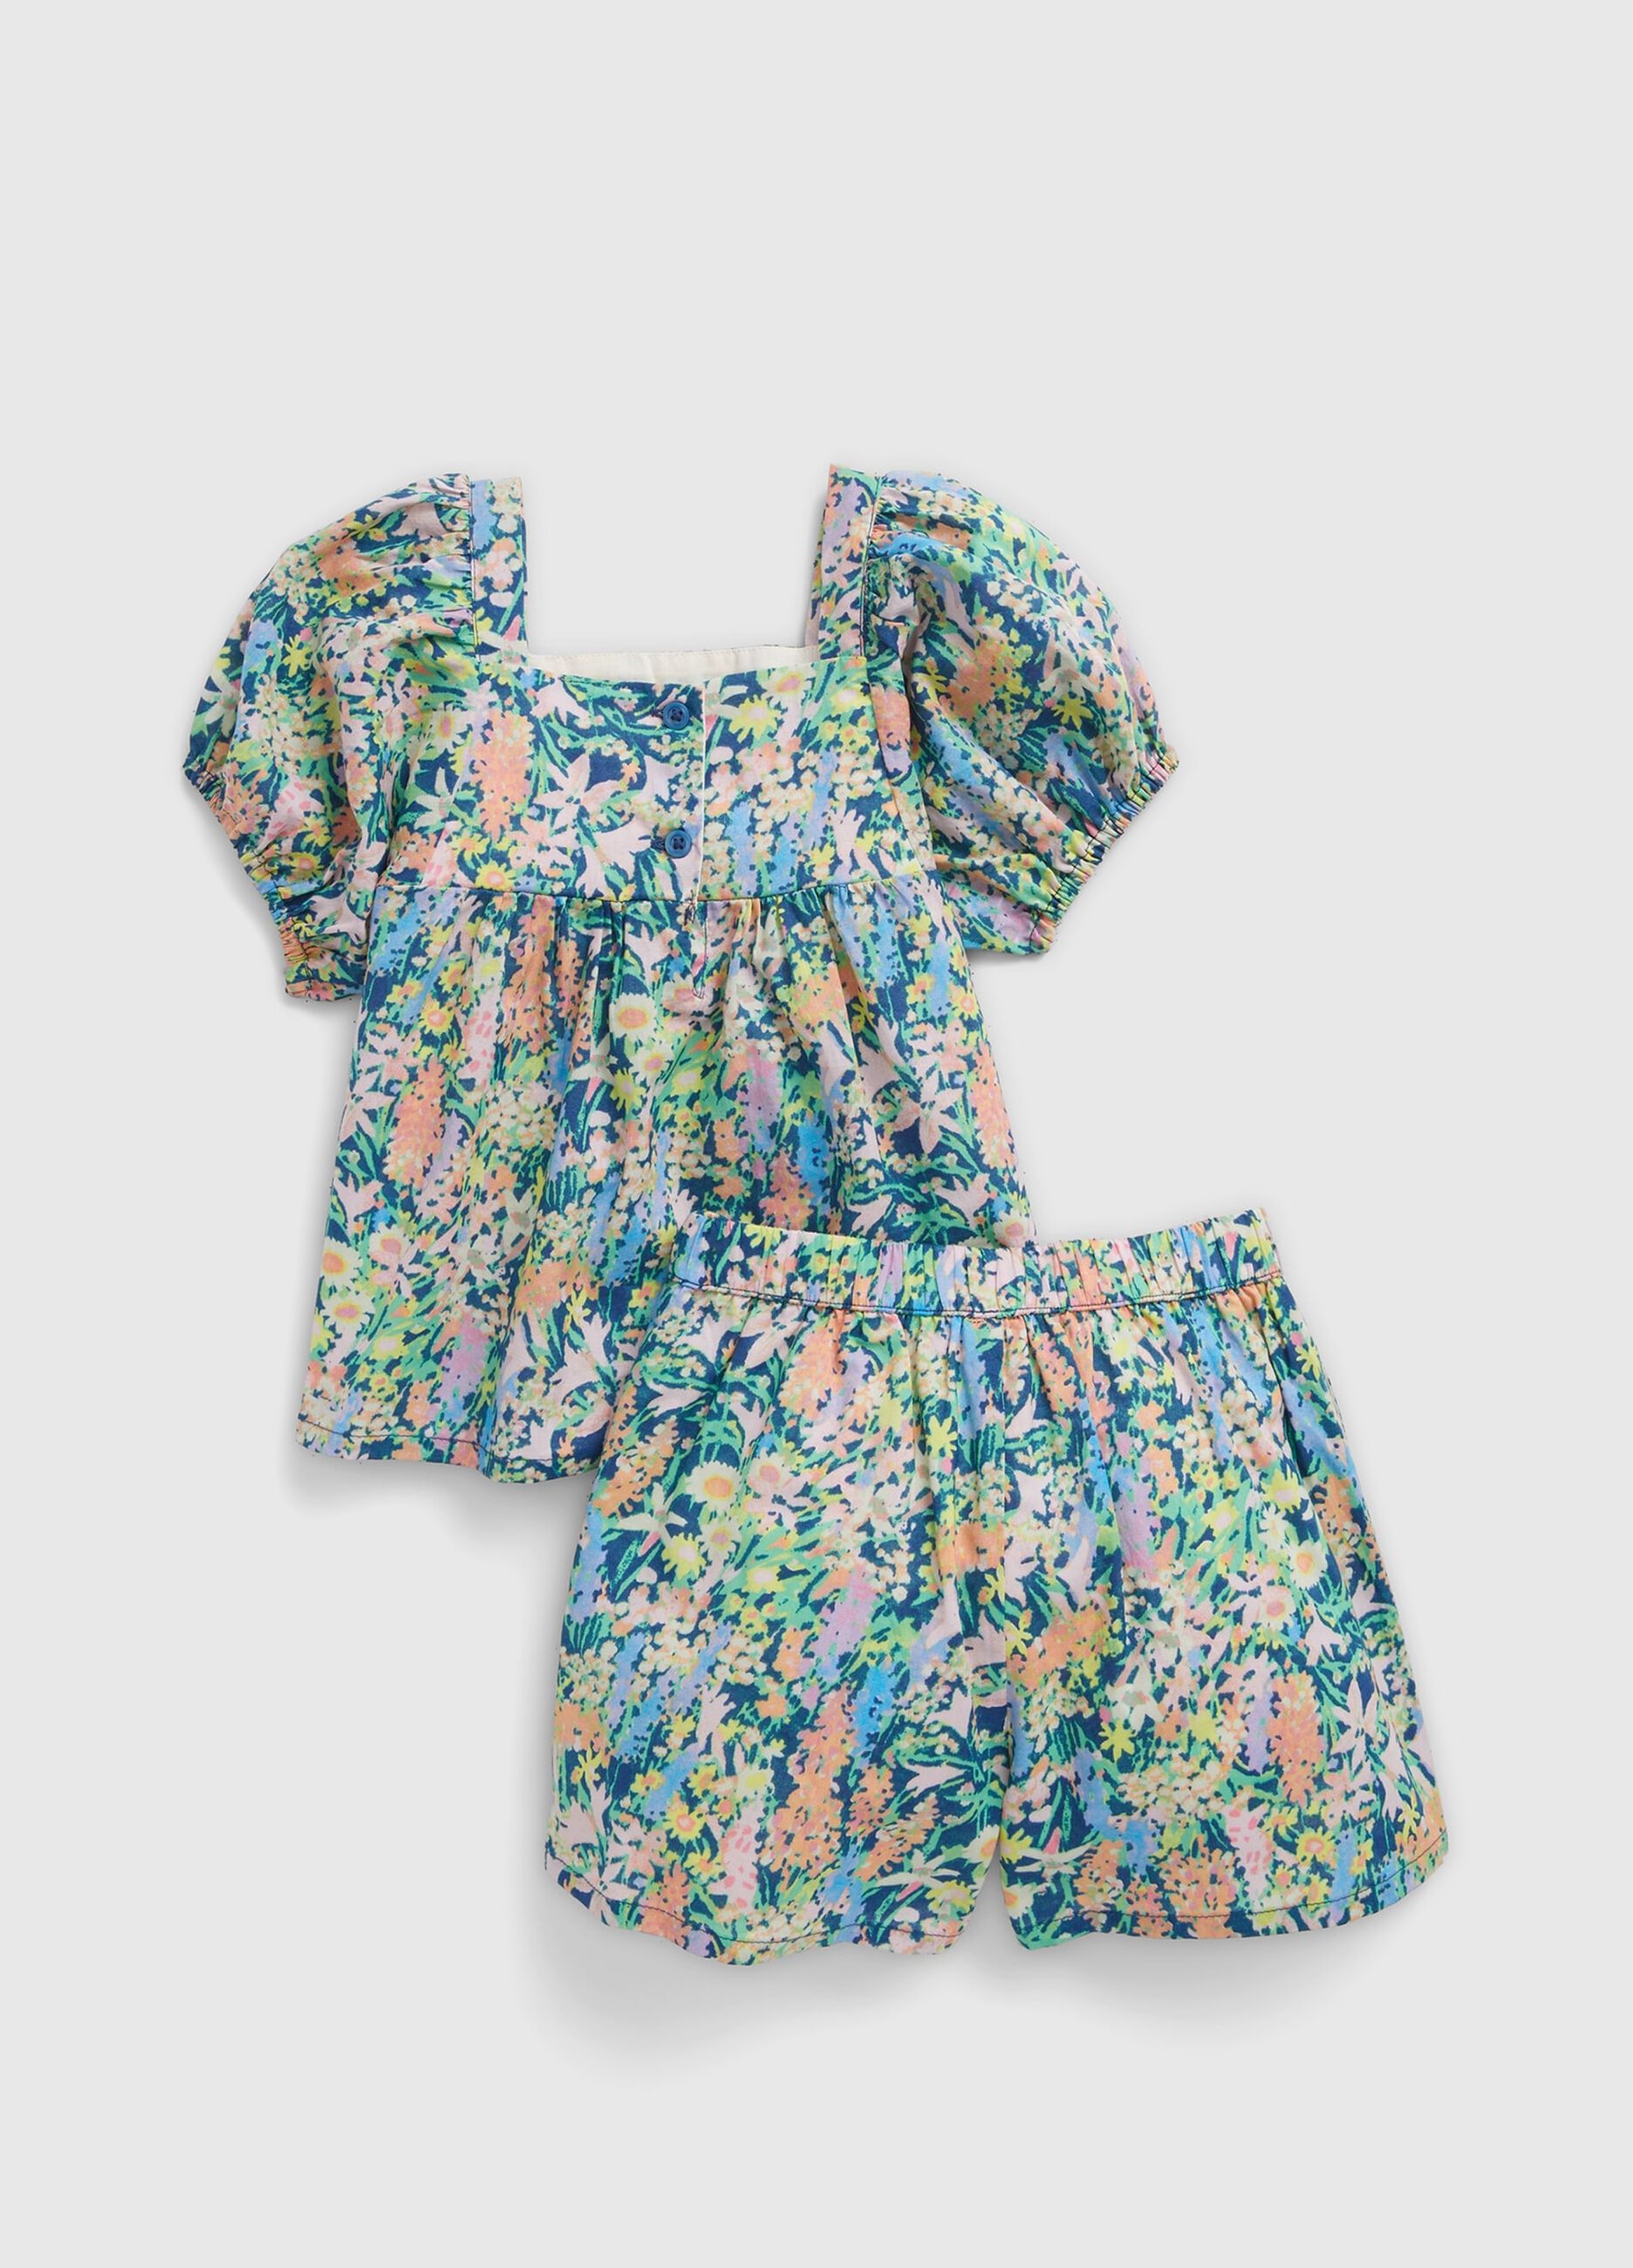 Floral pattern blouse and shorts set